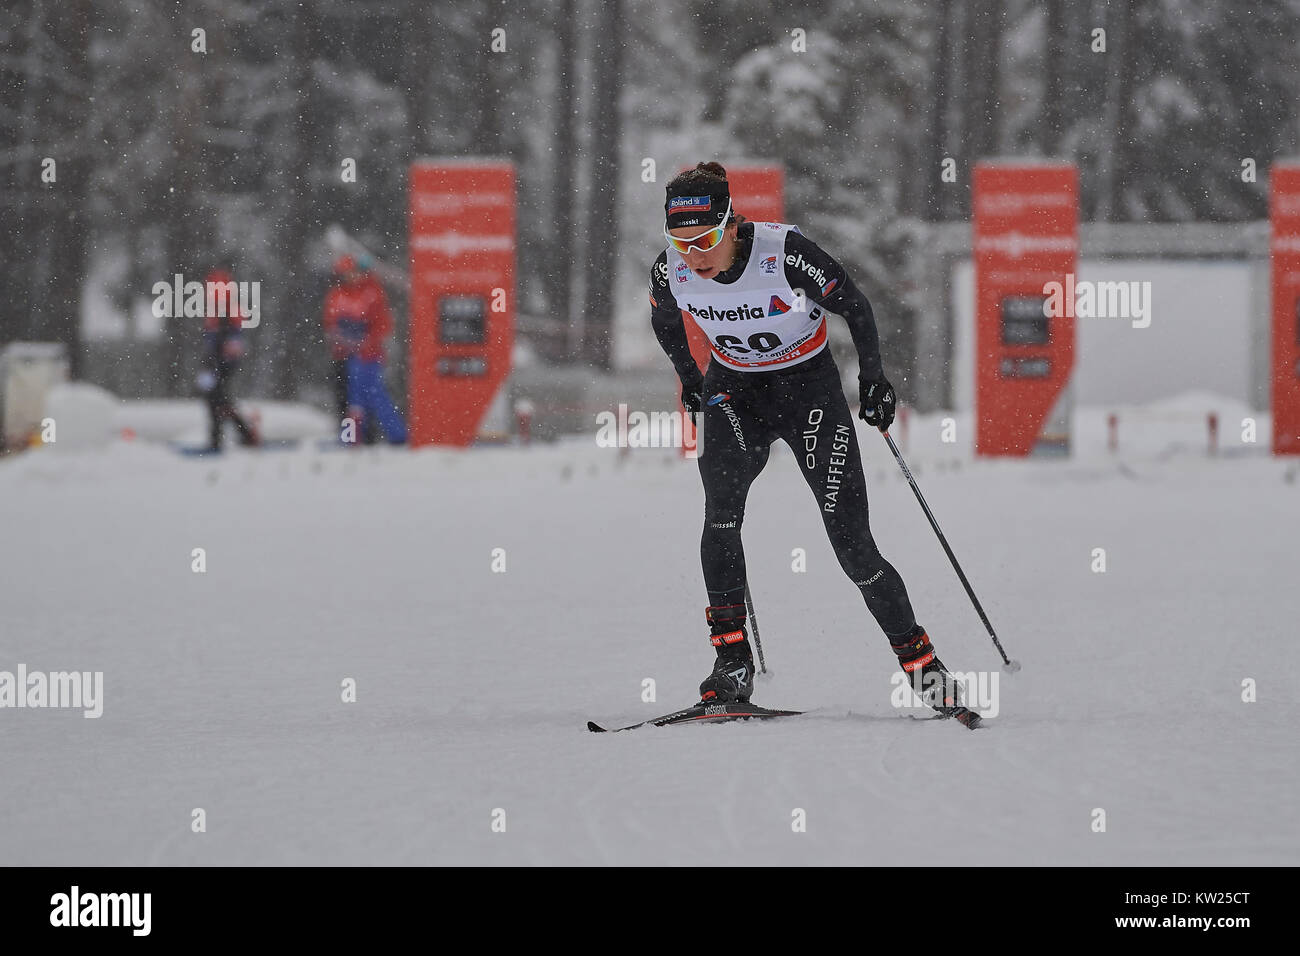 Lenzerheide, Switzerland, 30th December 2017. GASPARIN Selina (SUI) during the Ladies’ 1.5 km Sprint Competition at the FIS Cross Country Worldcup Tour de Ski 2017 in Lenzerheide. Photo: Cronos/Rolf Simeon/Alamy Live News Stock Photo